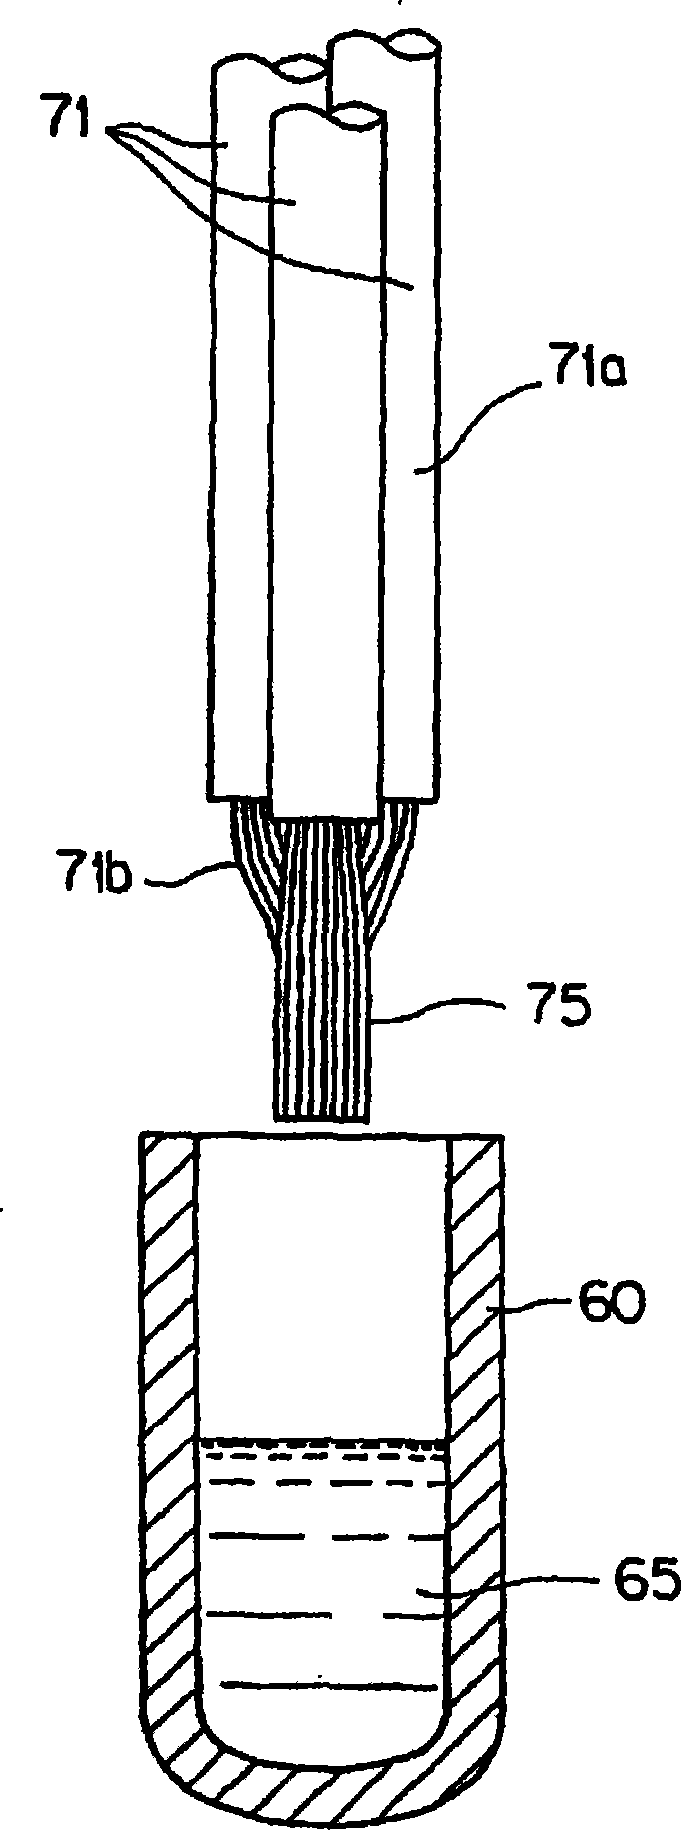 Method for waterproofing connection part of covered wire